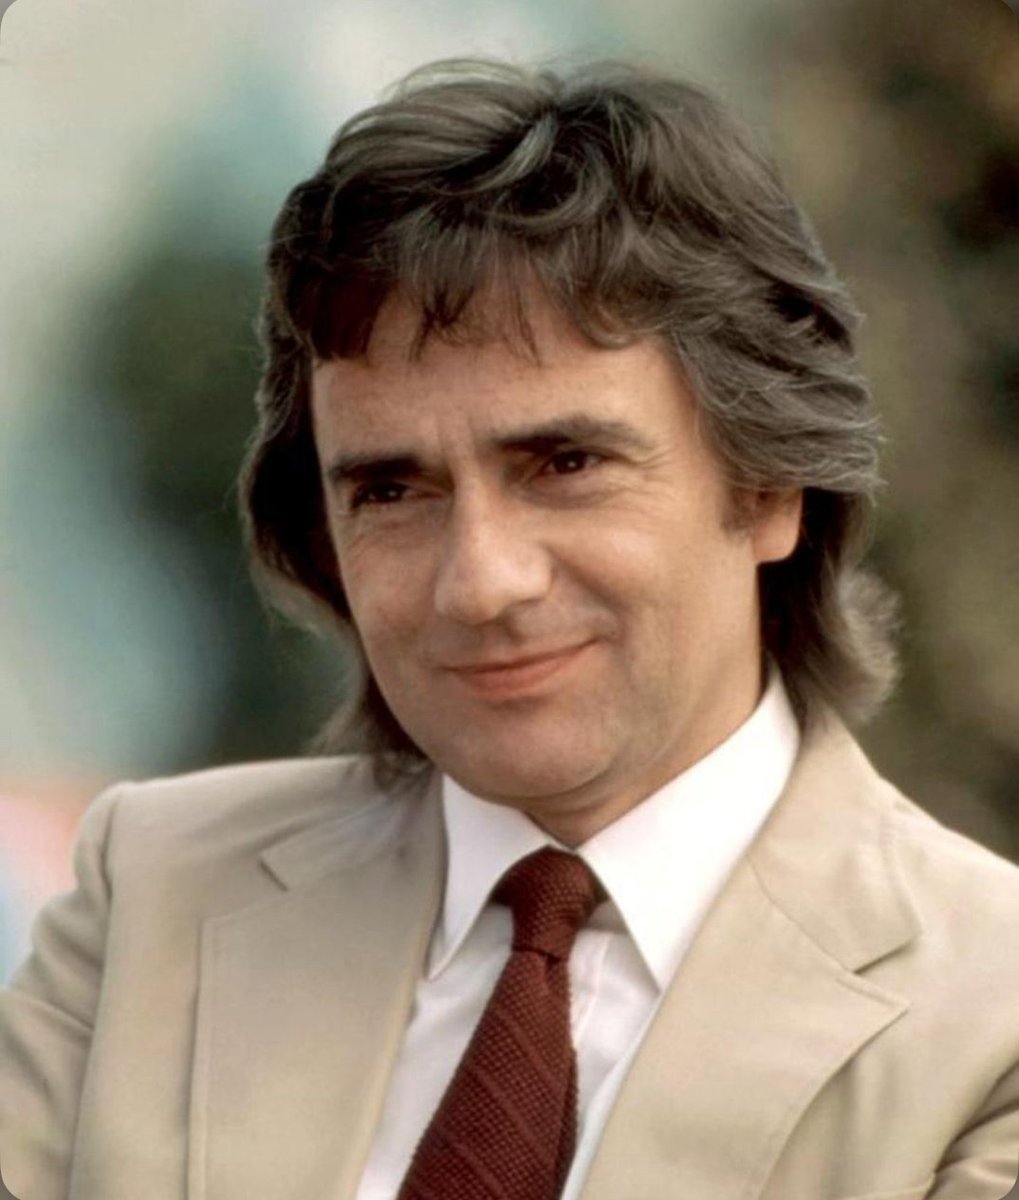 #DudleyMoore born 19 April 1935. Actor & Comedian “Not everyone who drinks is a poet. Some of us drink because we’re not poets”.